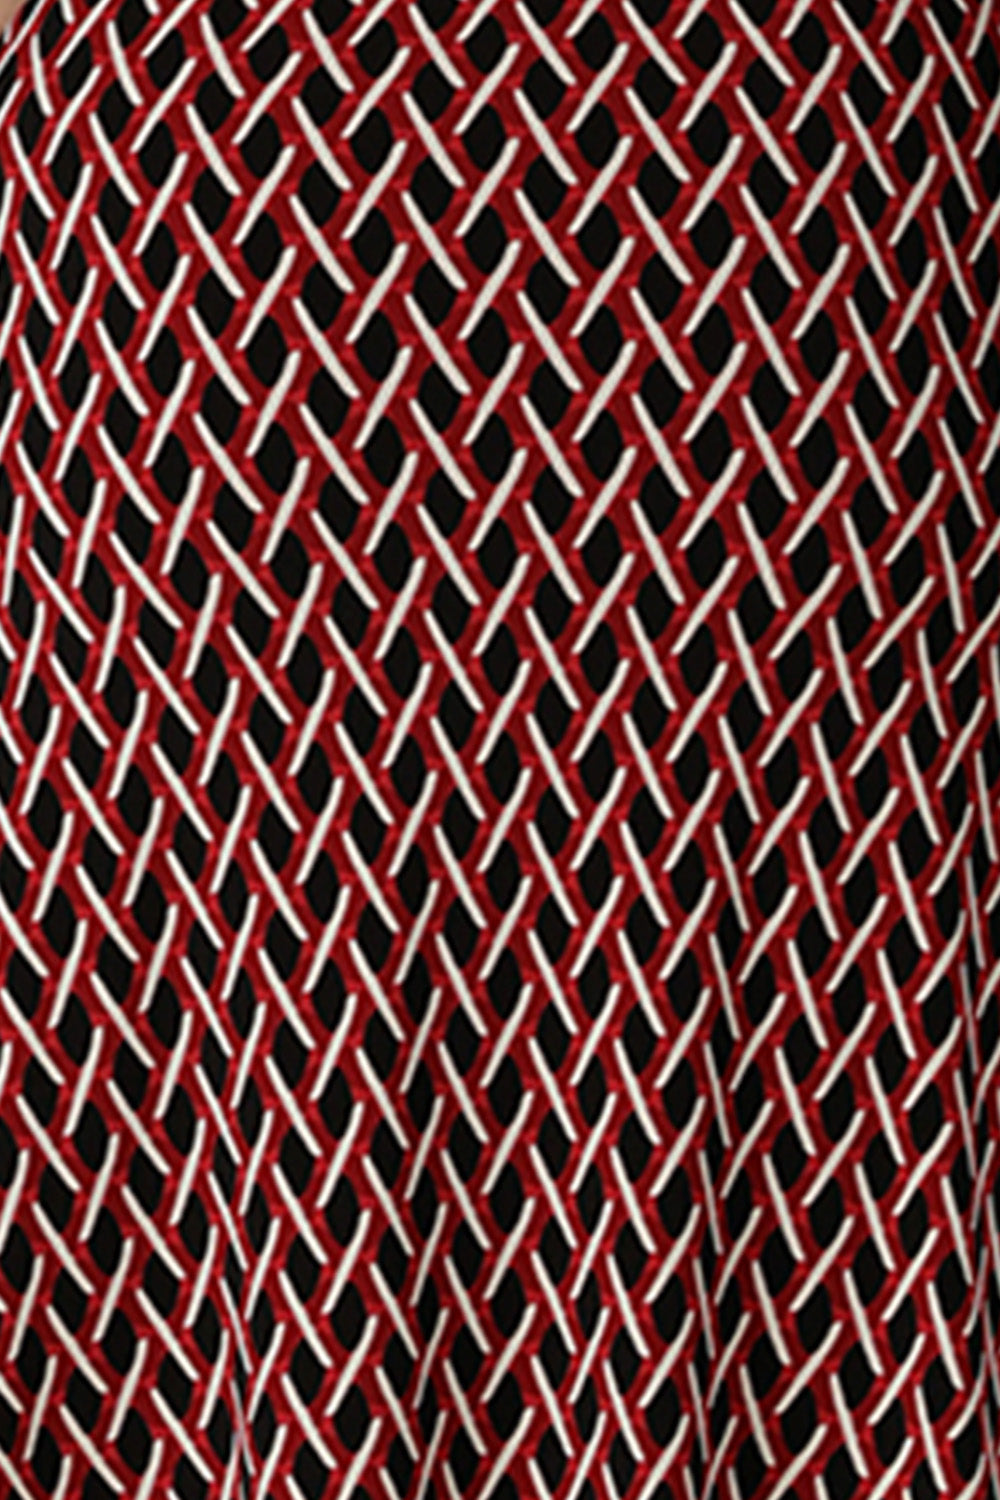 A swatch of red, vanilla and black 'Chevron' print fabric used by Australian fashion brand, Leina & Fleur to make a range of women's work tops